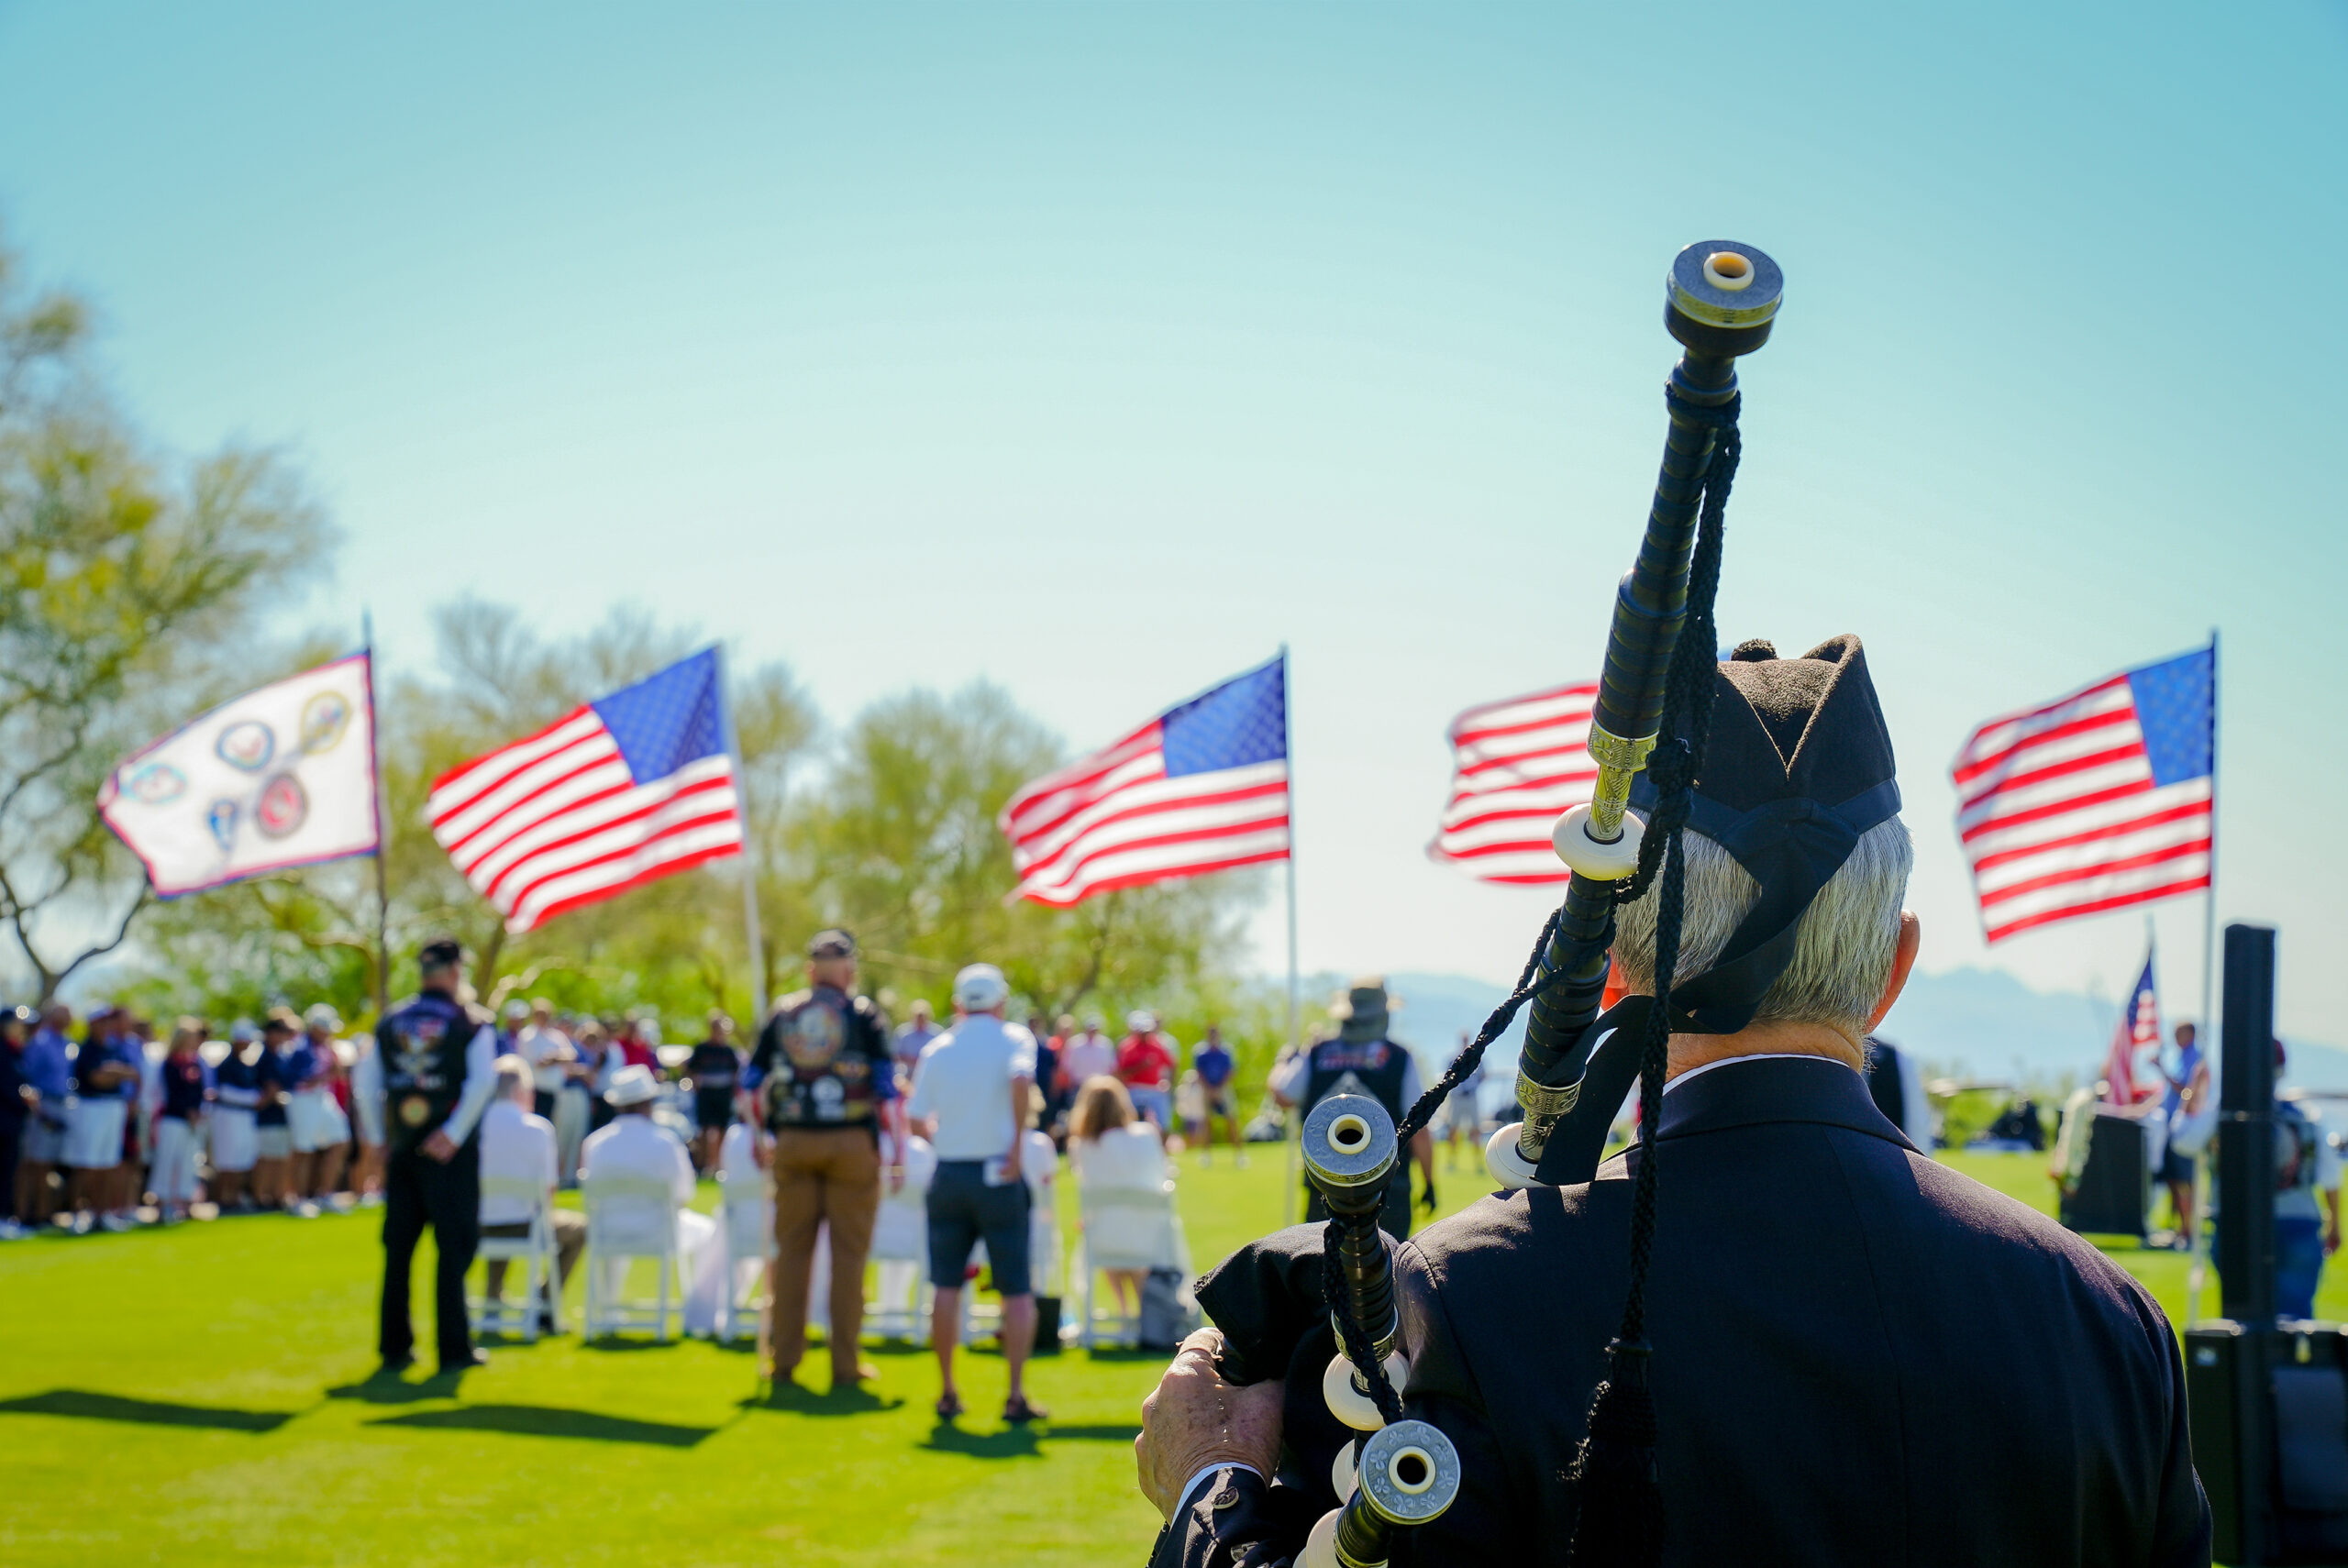 The Opening Ceremony is a tradition at Tee It Up for the Troops events that pays tribute to American heroes who have, and continue to, put their lives at risk on the frontline.